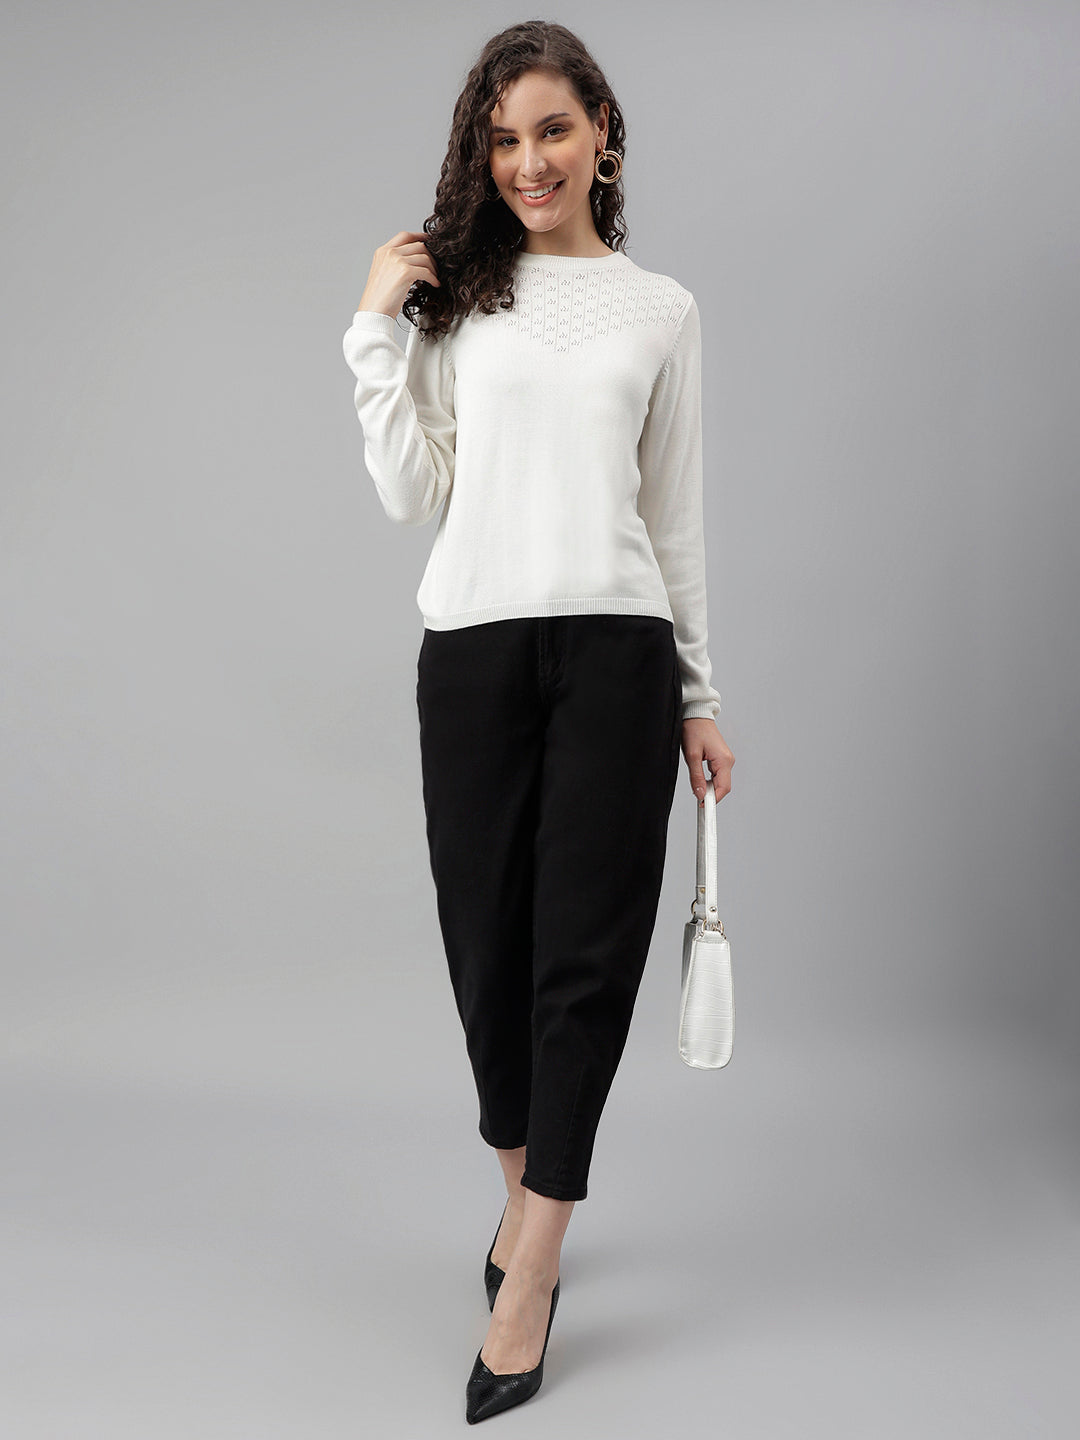 Ivory Full Sleeve Solid Pullover Sweatertop